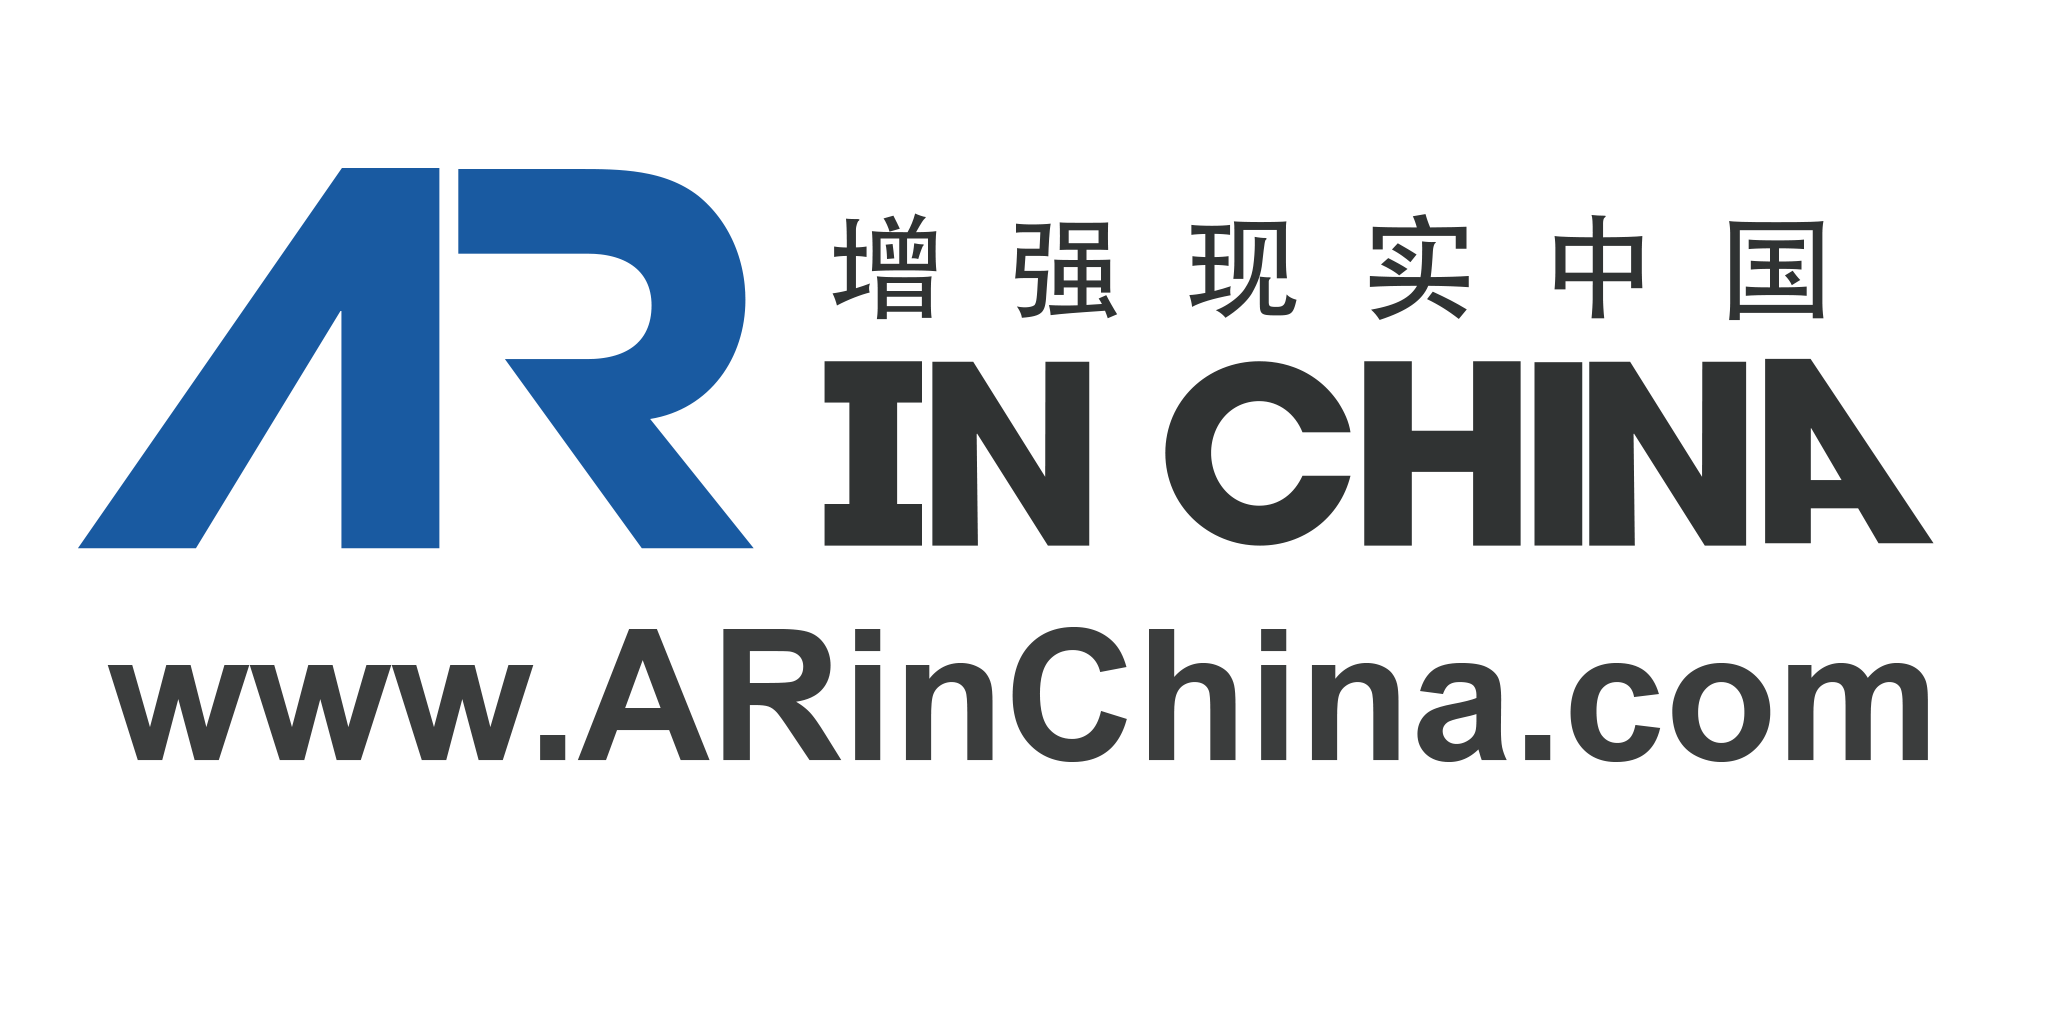 AR in China